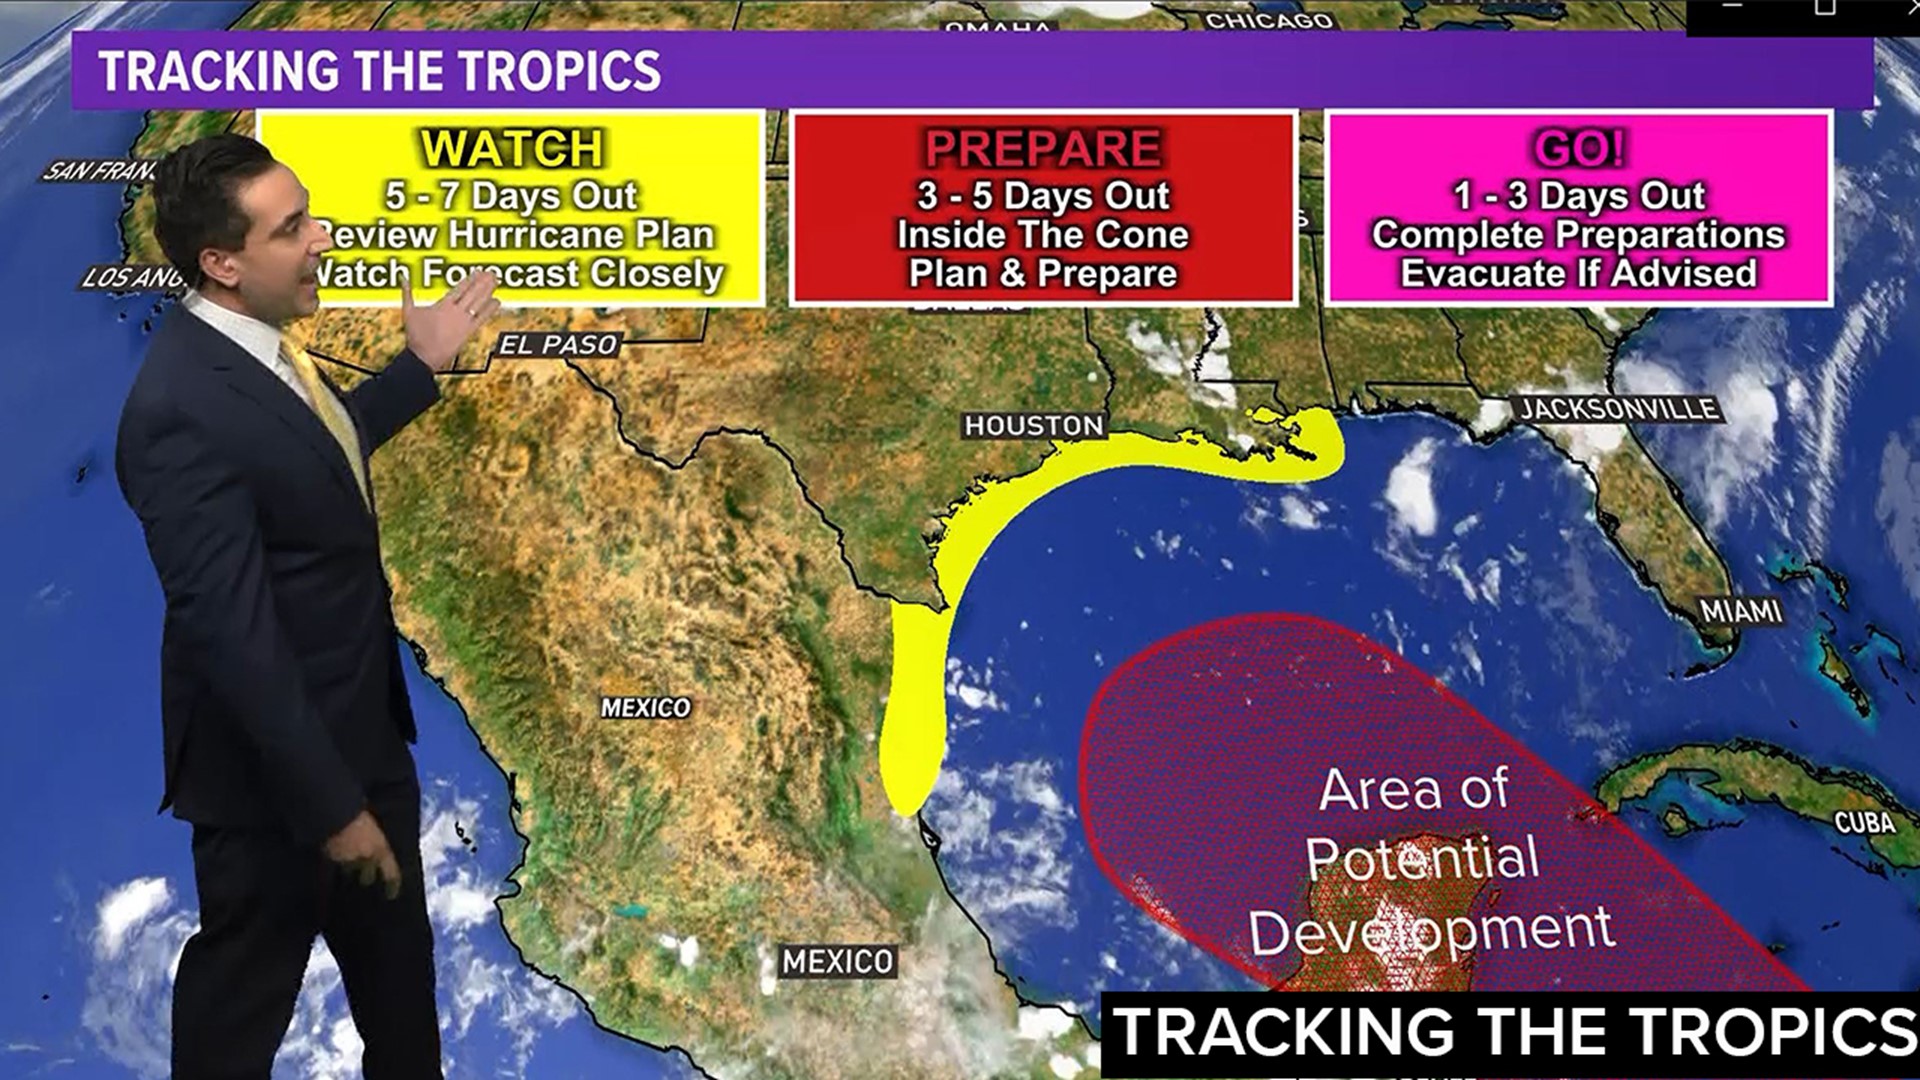 In the tropics Invest 99L moving closer to Gulf of Mexico, soon to